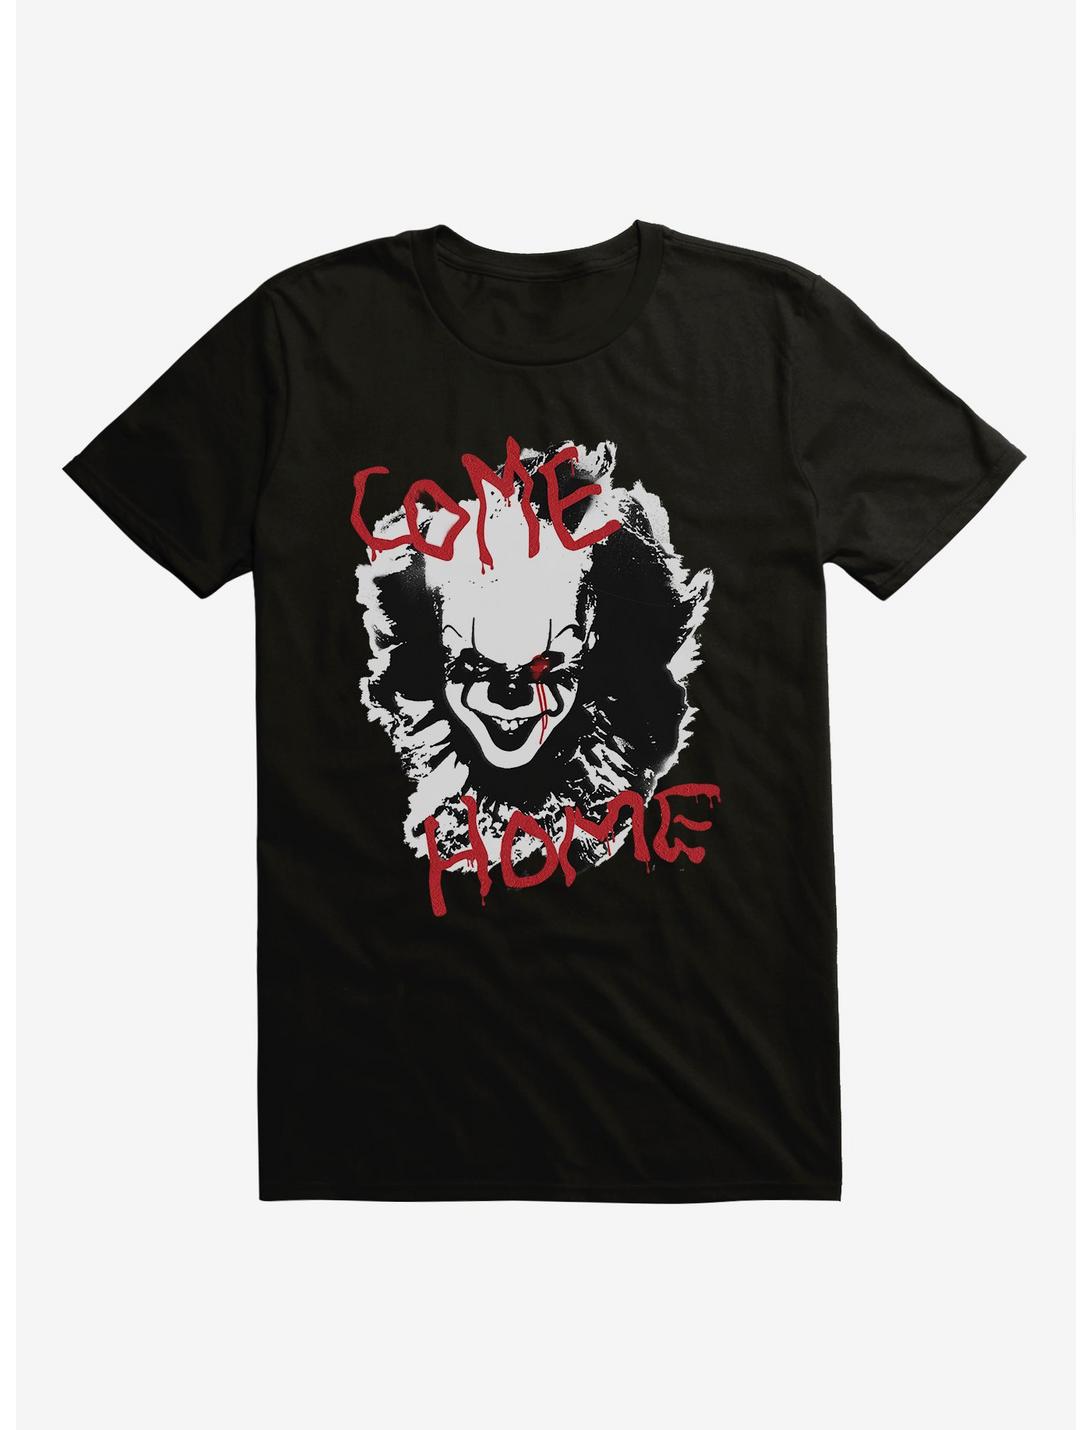 IT Chapter Two Come Home Cutout T-Shirt, BLACK, hi-res